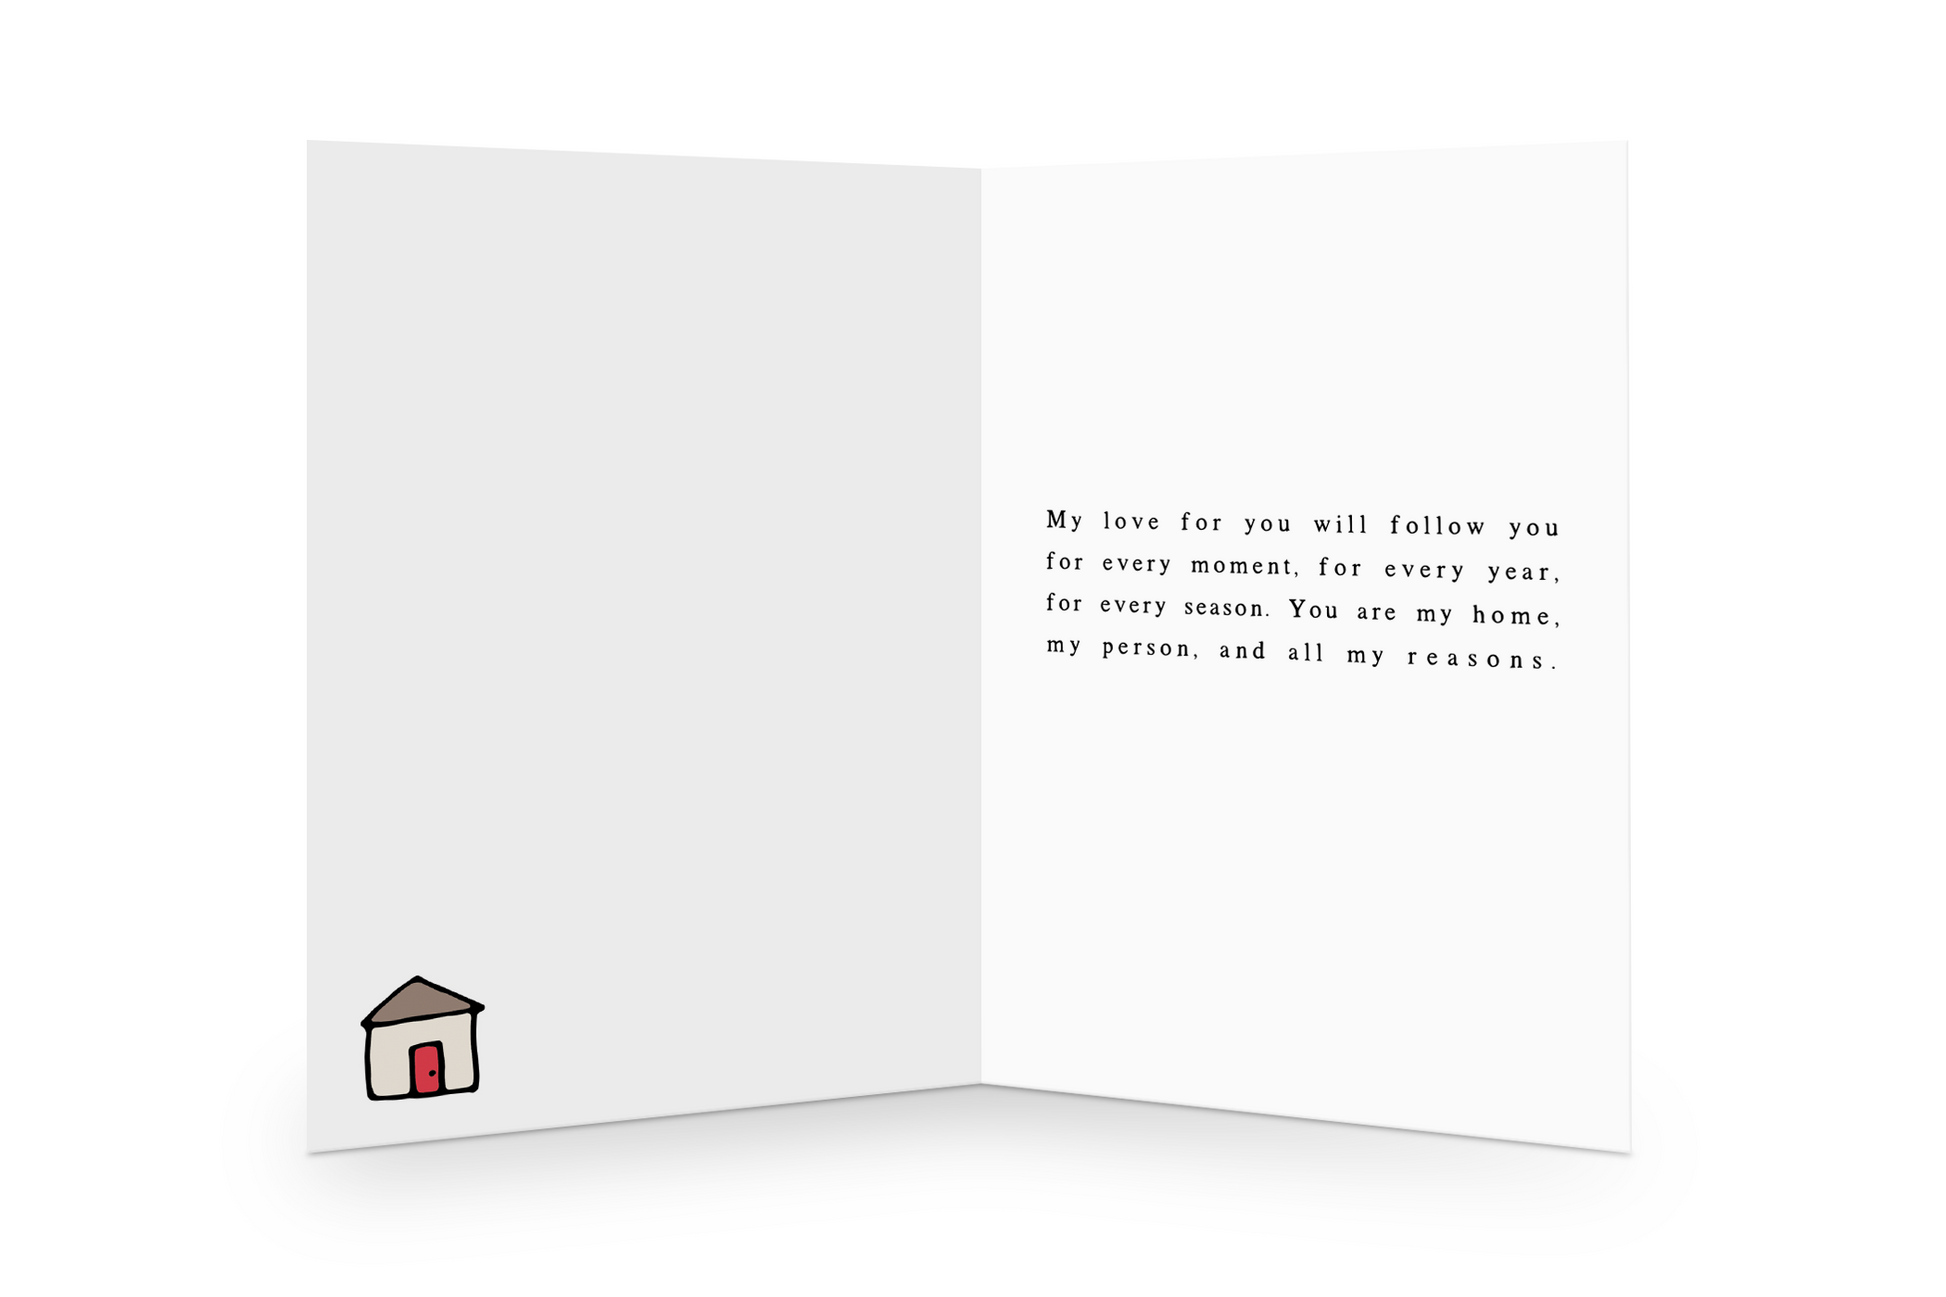 Love poem inside greeting card by Courtney Peppernell